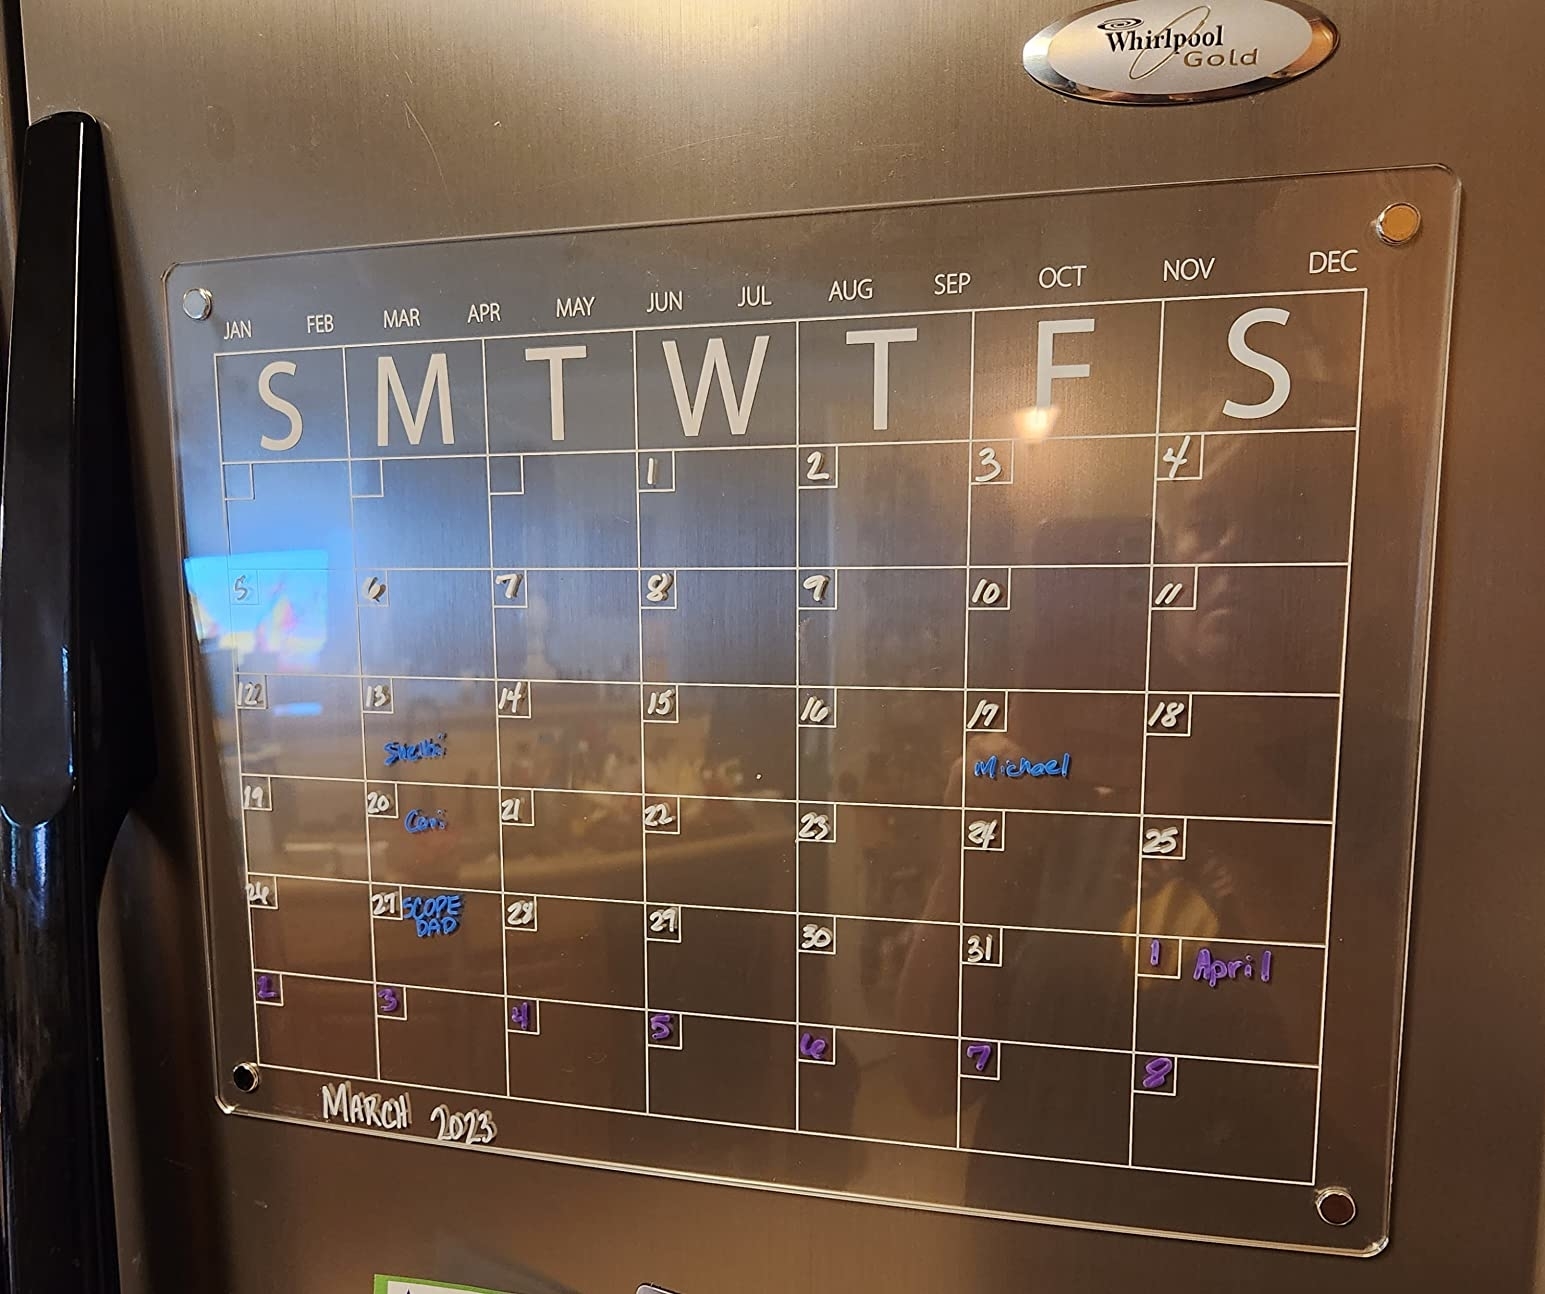 Reviewer image of the clear acrylic calendar on their fridge